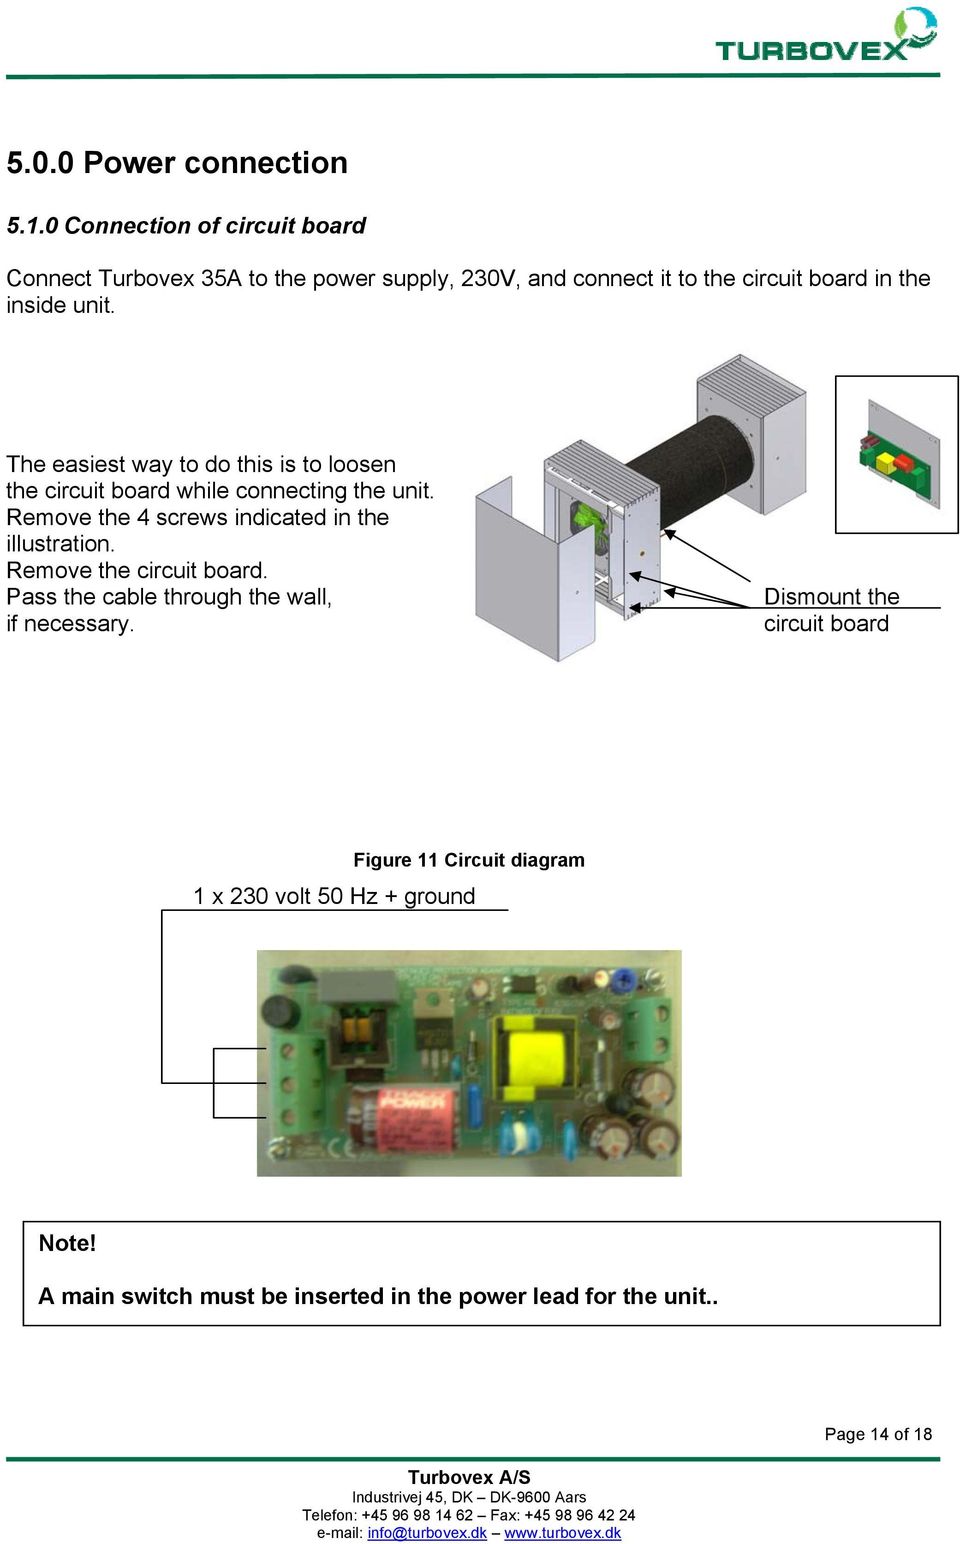 The easiest way to do this is to loosen the circuit board while connecting the unit.